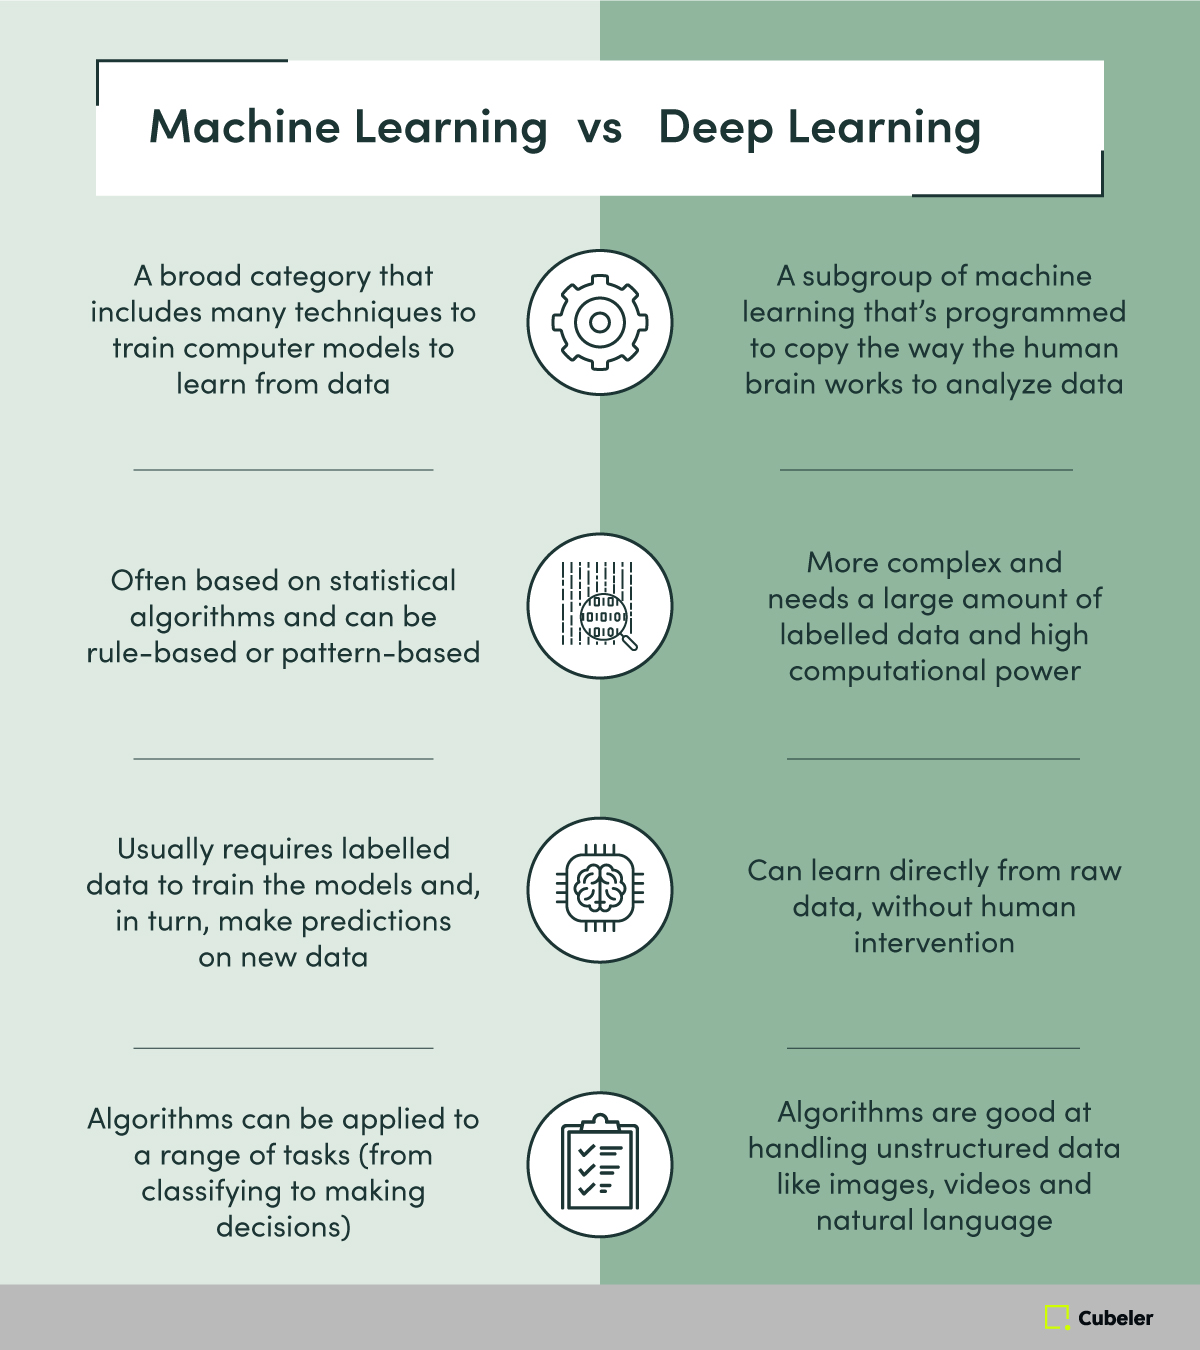 The difference between machine learning and deep learning.